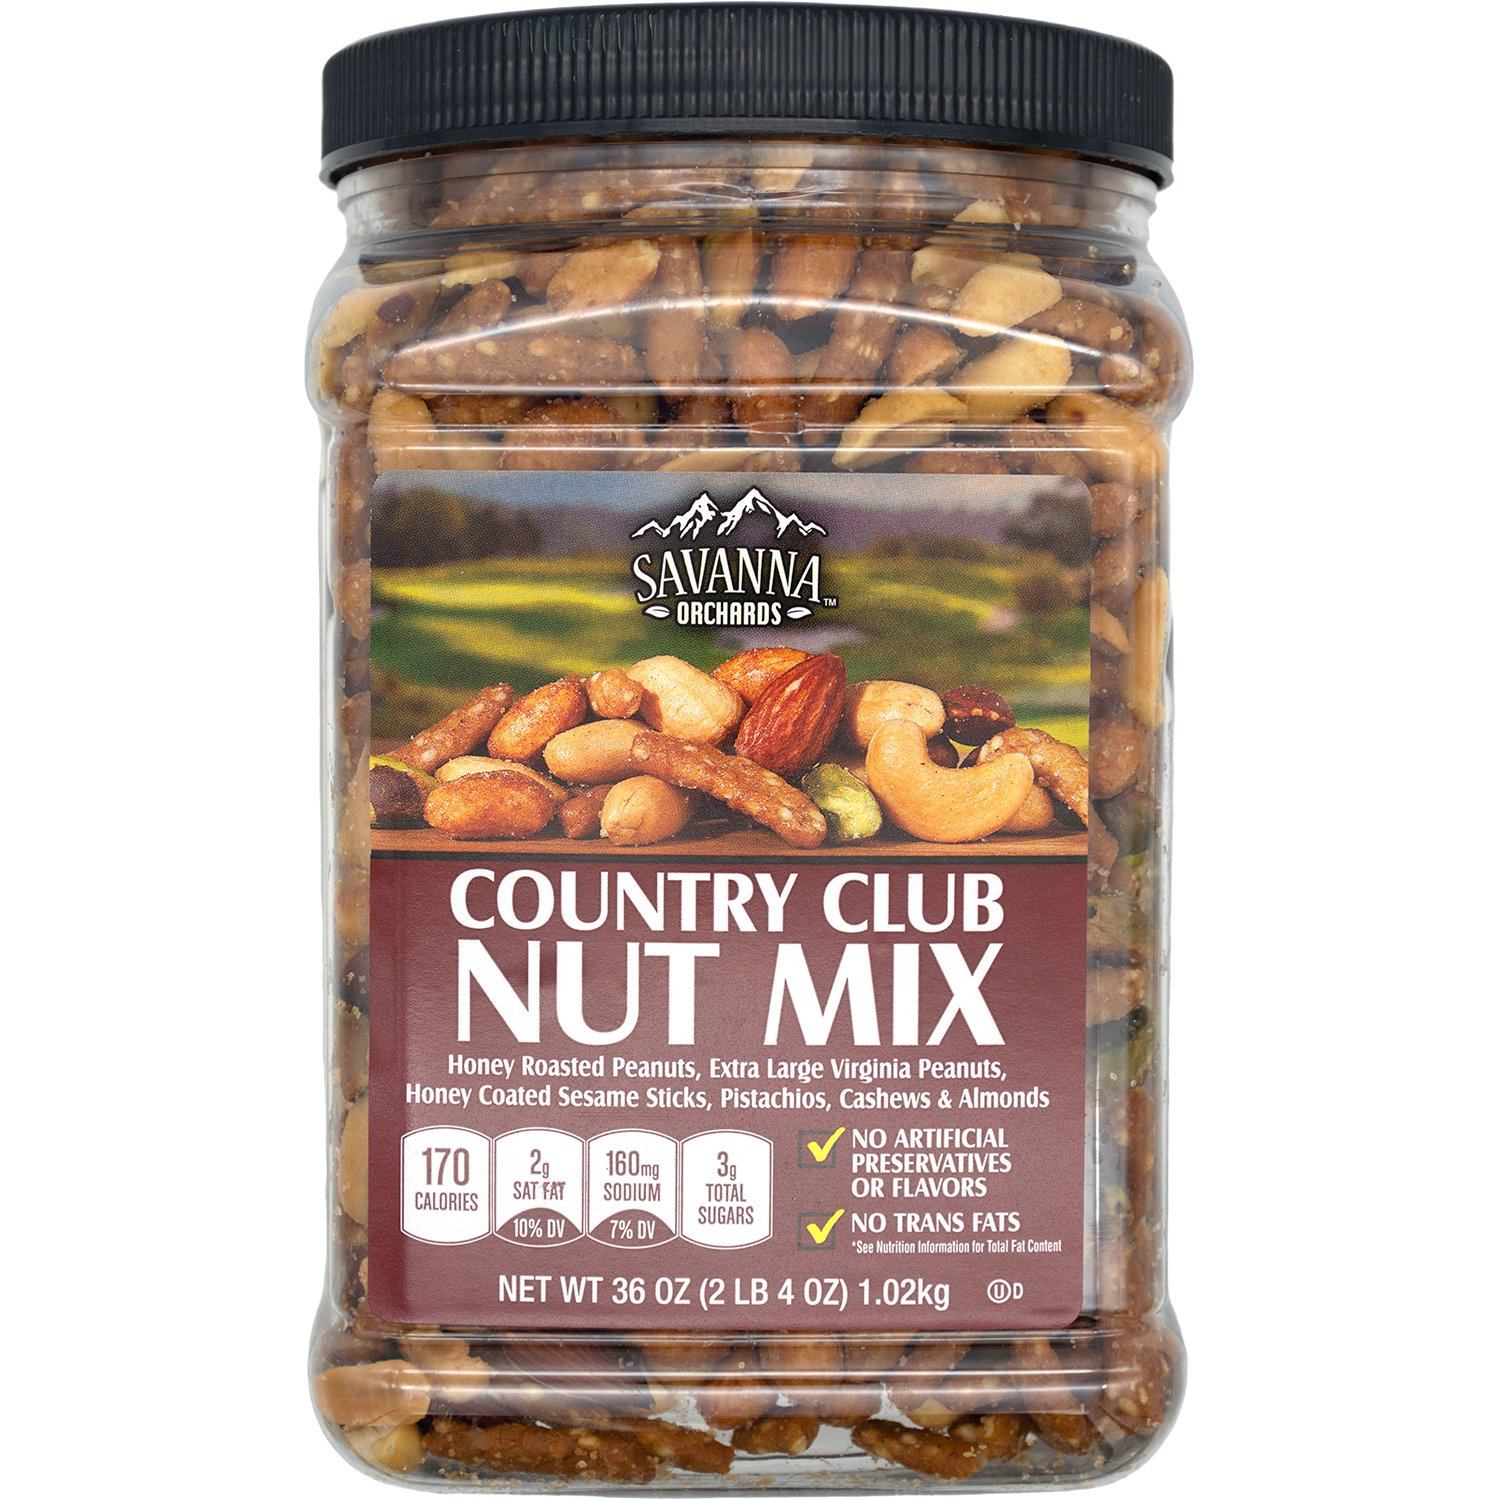 Calories in Savanna Orchards Gourmet Honey Roasted Nut Mix and Nutrition  Facts